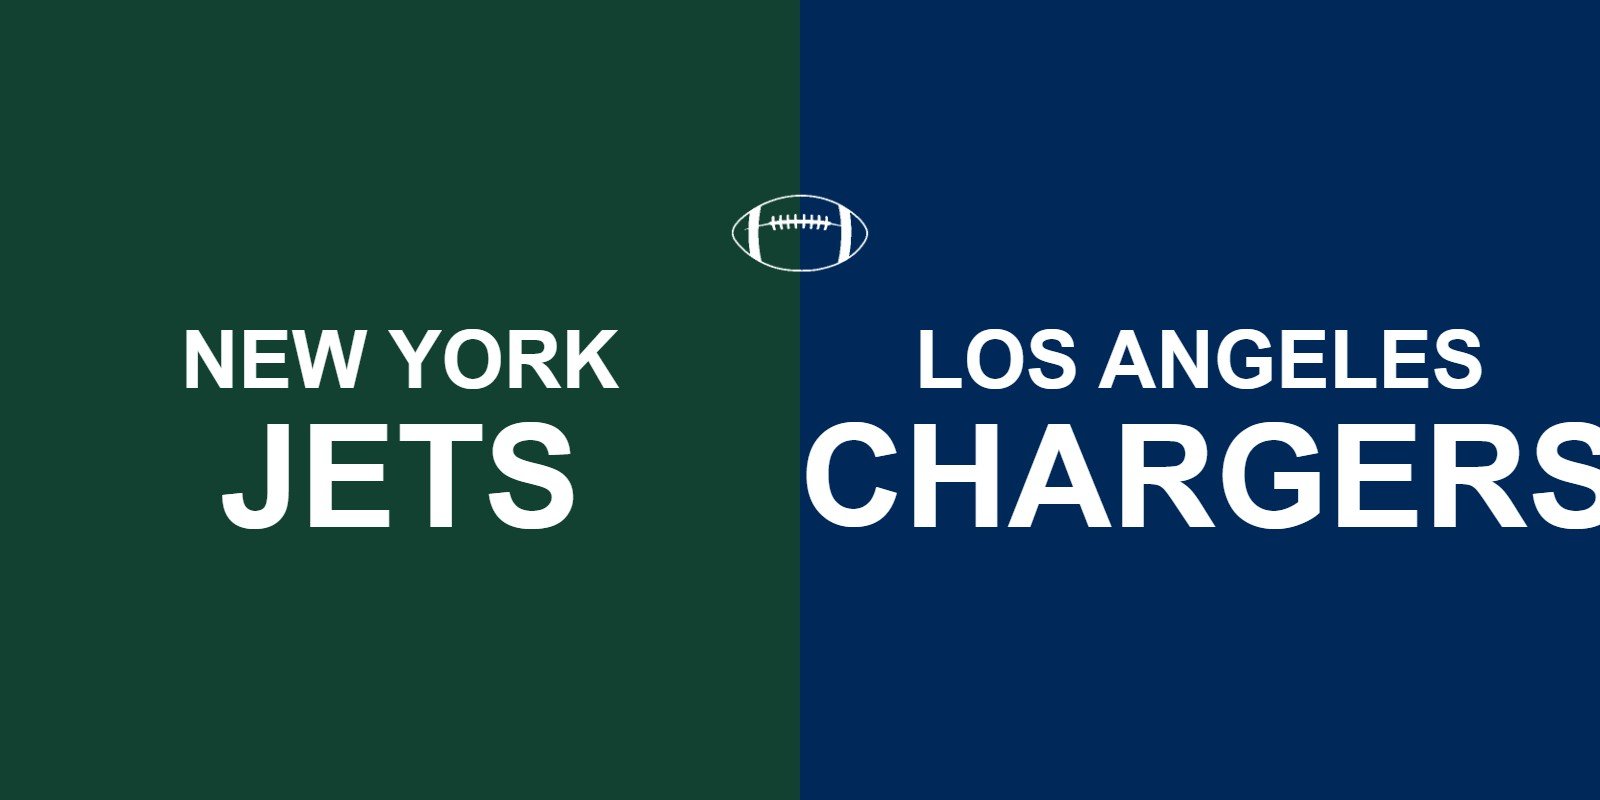 Jets vs Chargers